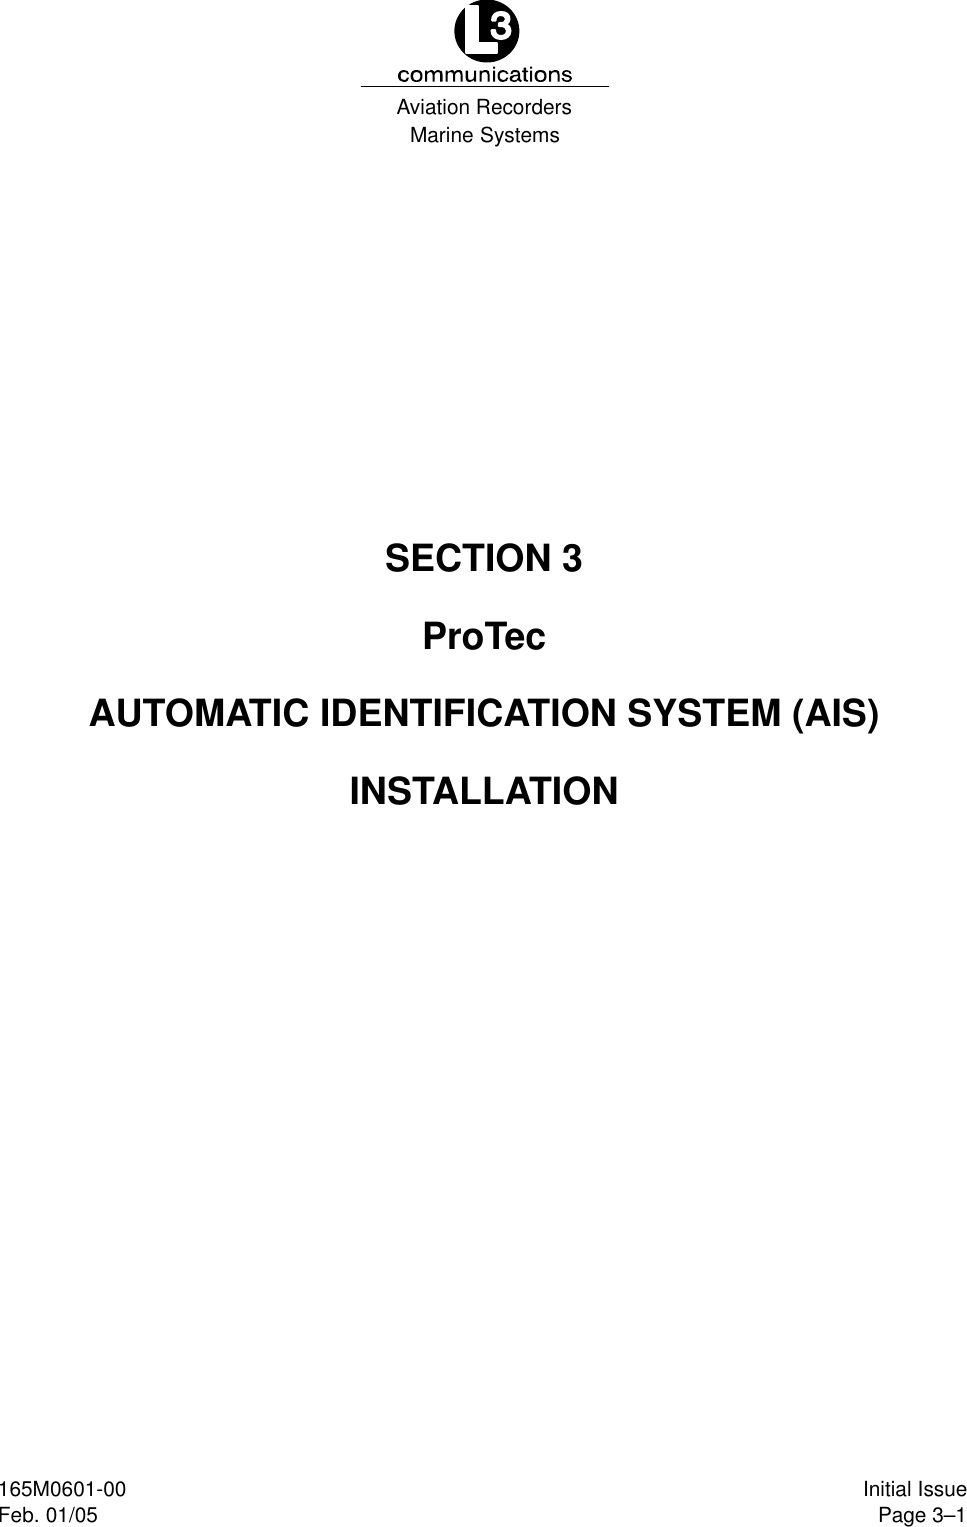 Marine SystemsAviation RecordersPage 3–1Initial Issue165M0601-00Feb. 01/05SECTION 3ProTecAUTOMATIC IDENTIFICATION SYSTEM (AIS)INSTALLATION